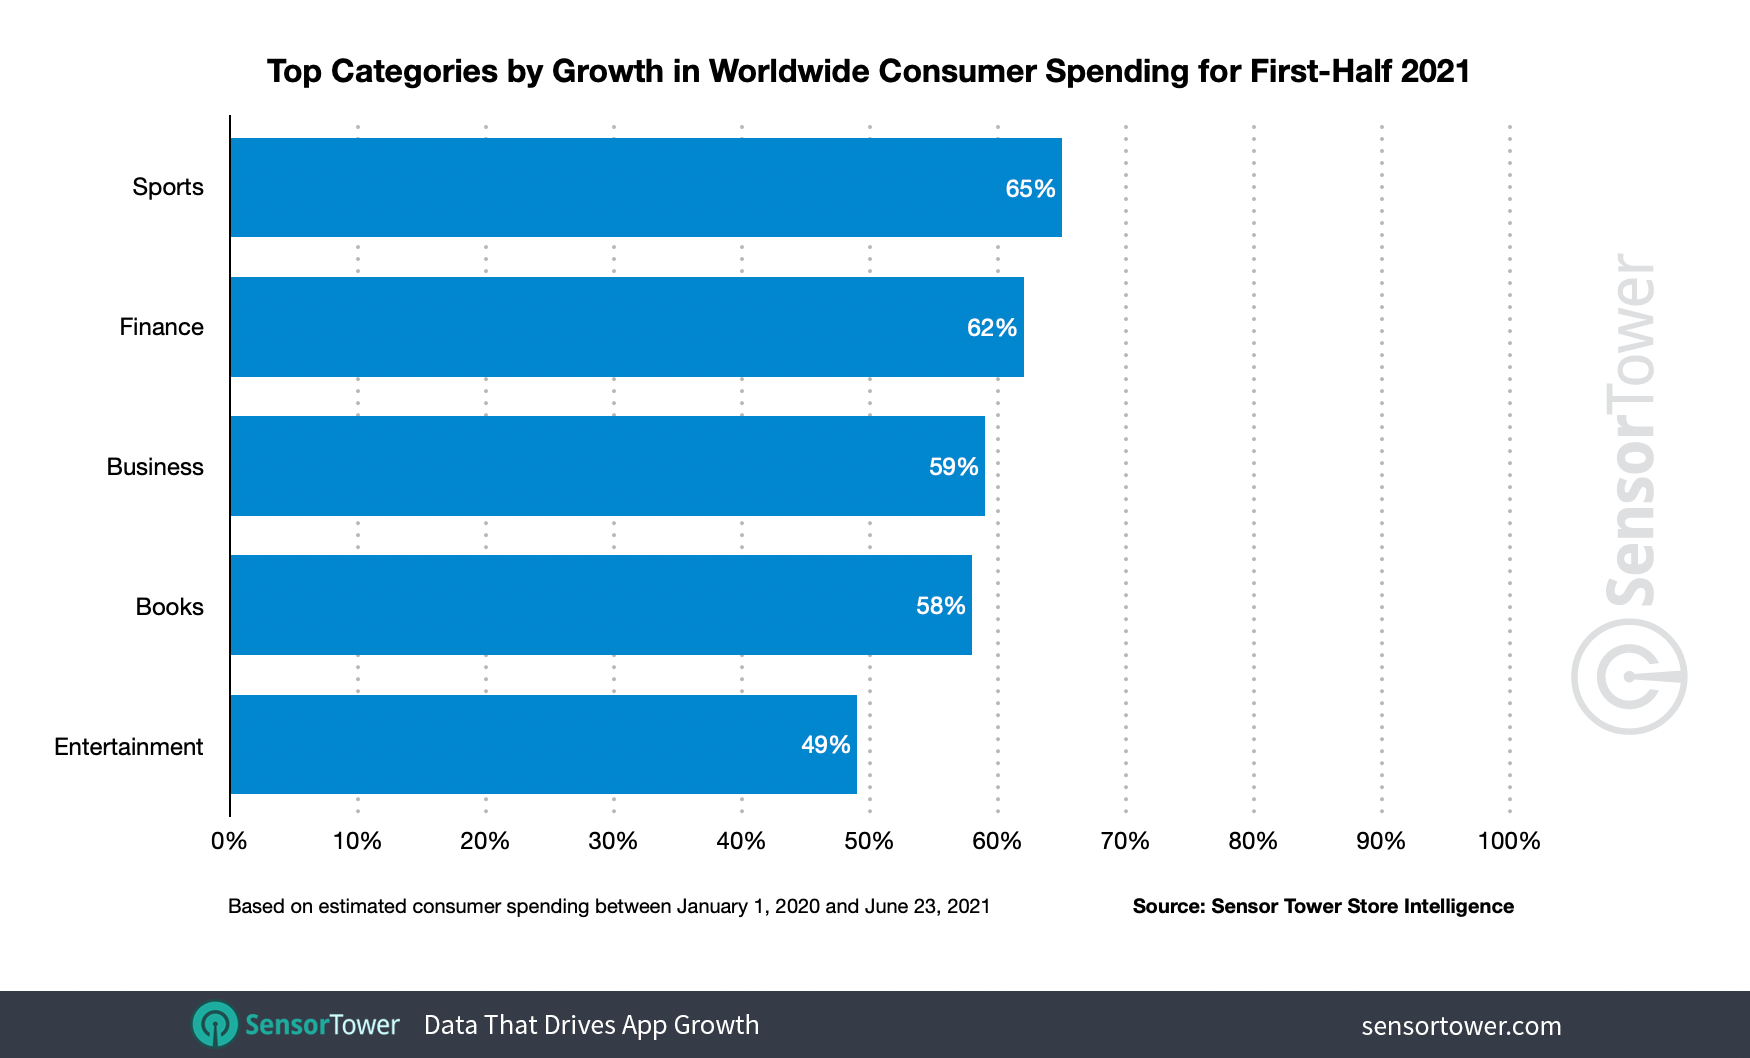 The top 10 categories by worldwide revenue growth